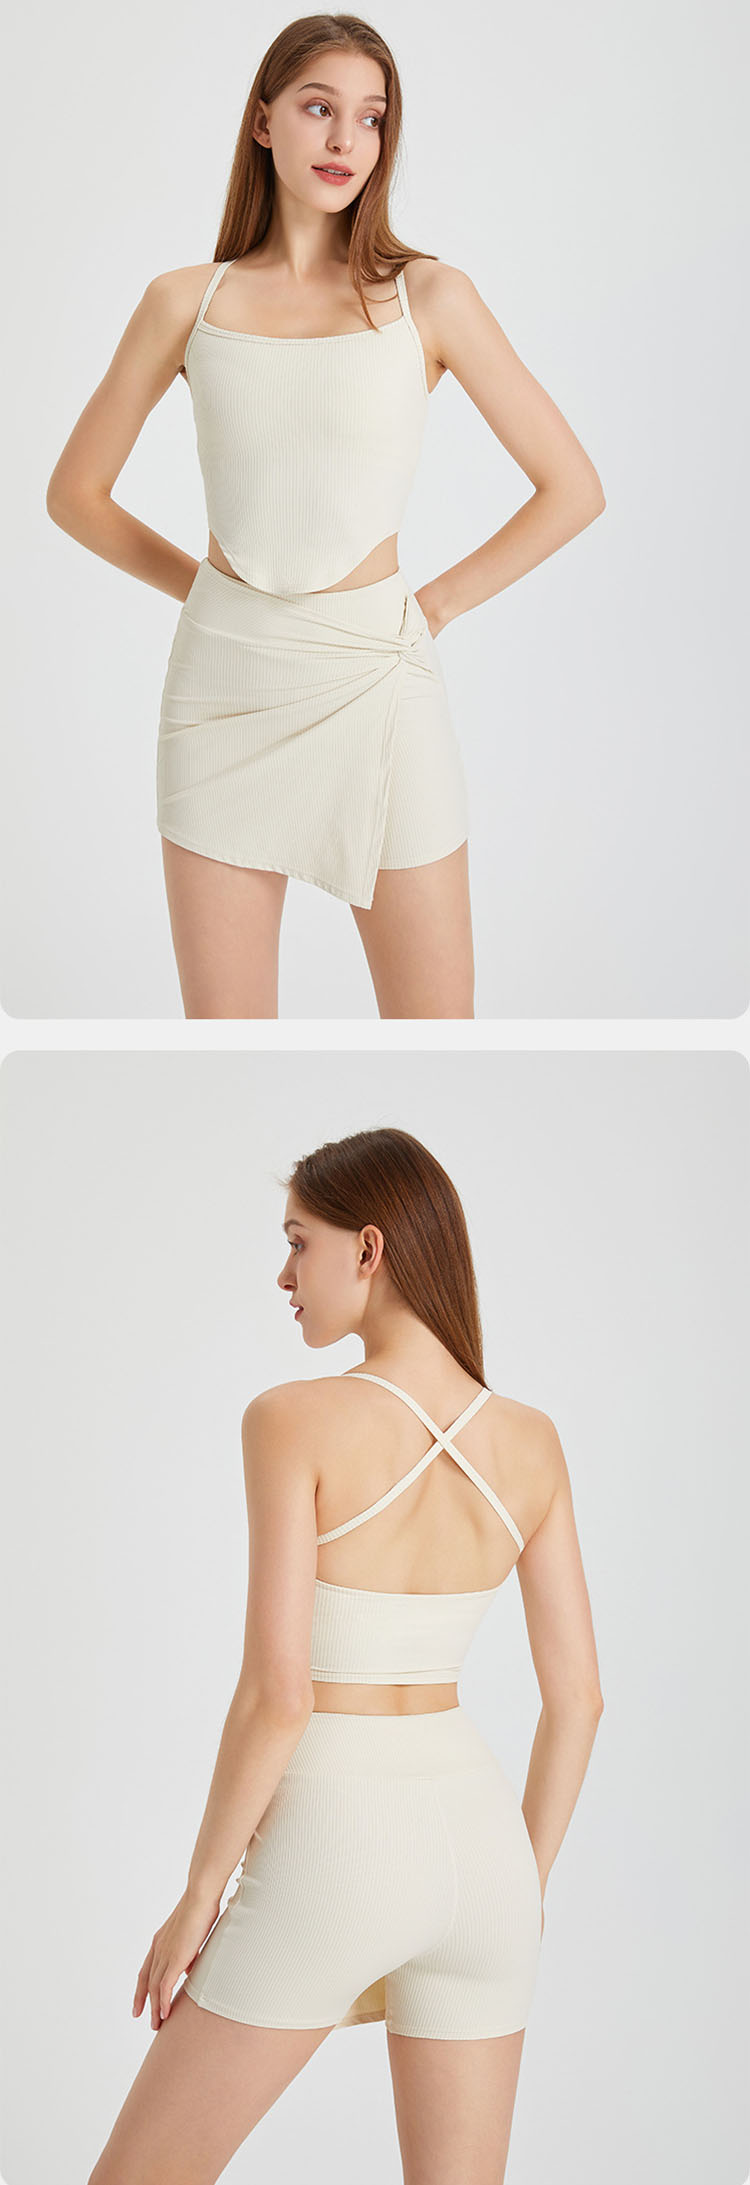 Cross back design is adopted to show sexy back and help sweat